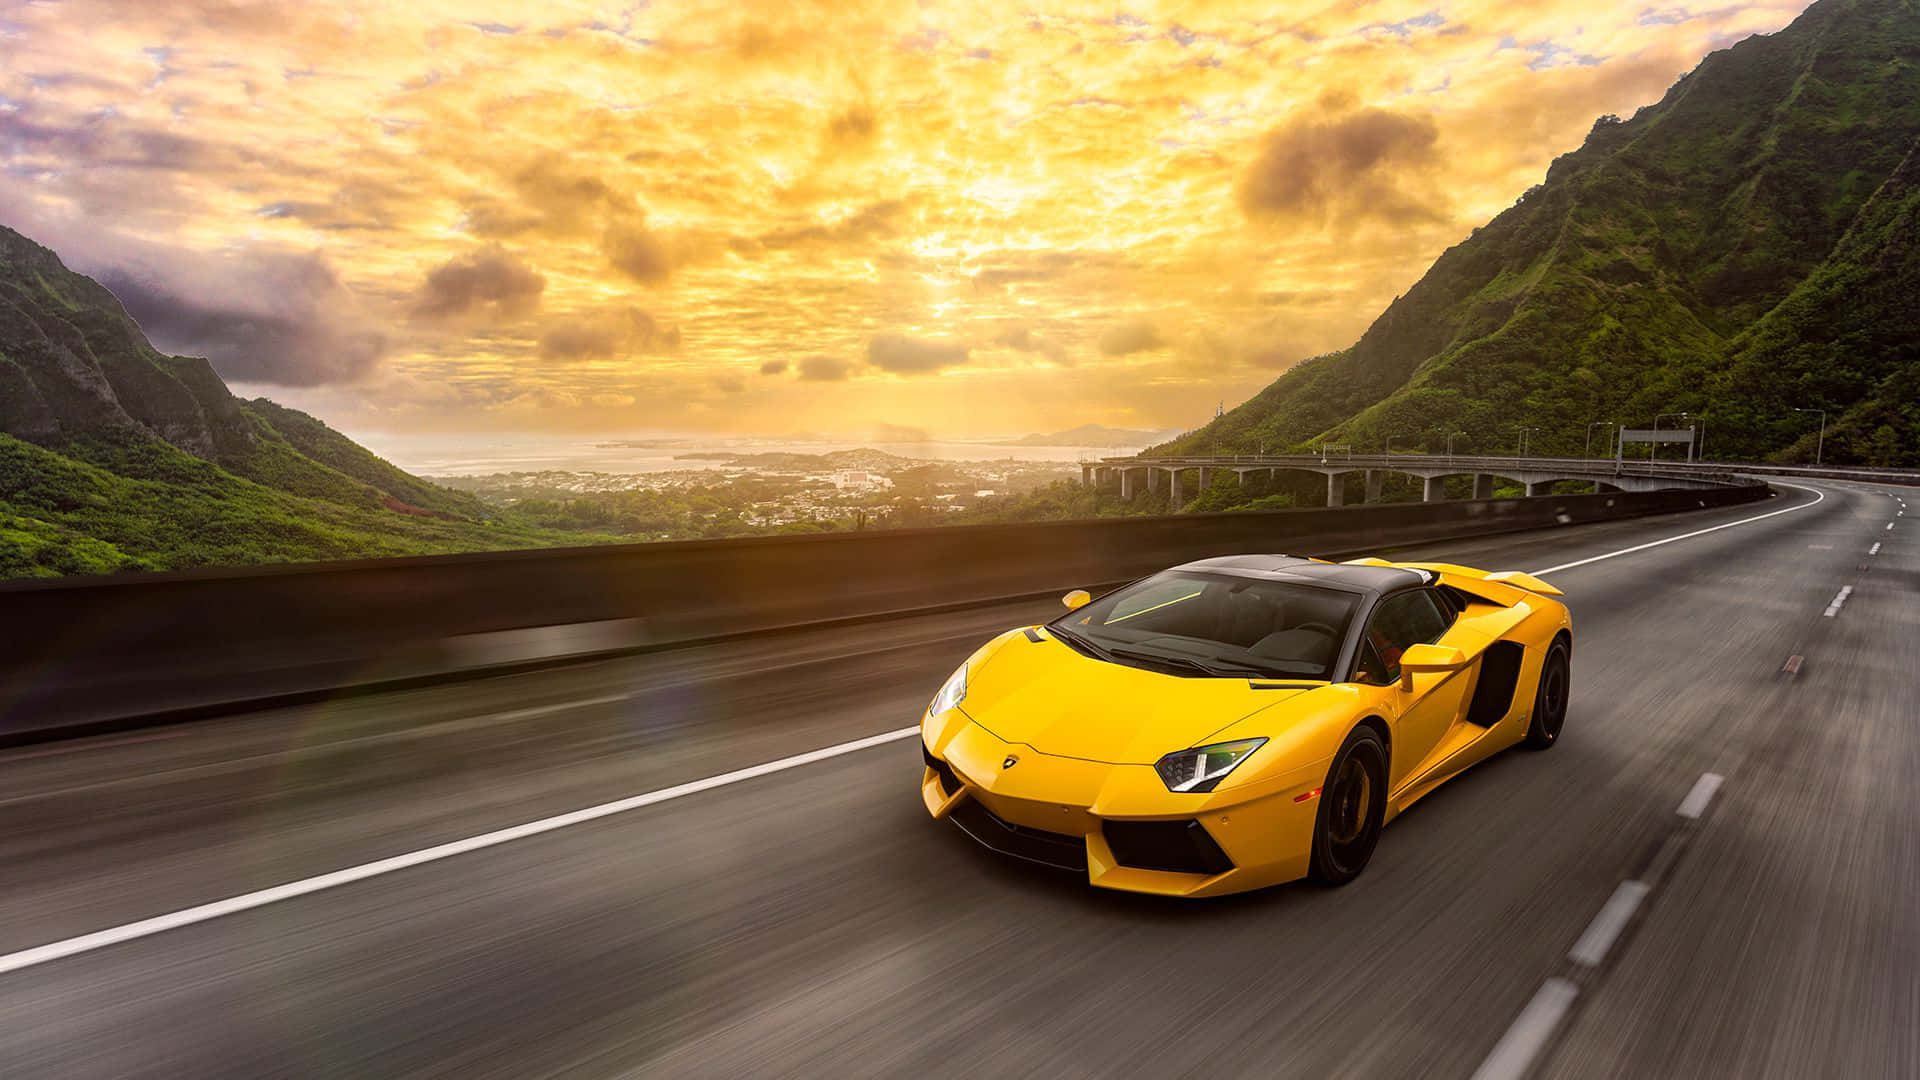 Luxurious Yellow Sports Car In Action Wallpaper